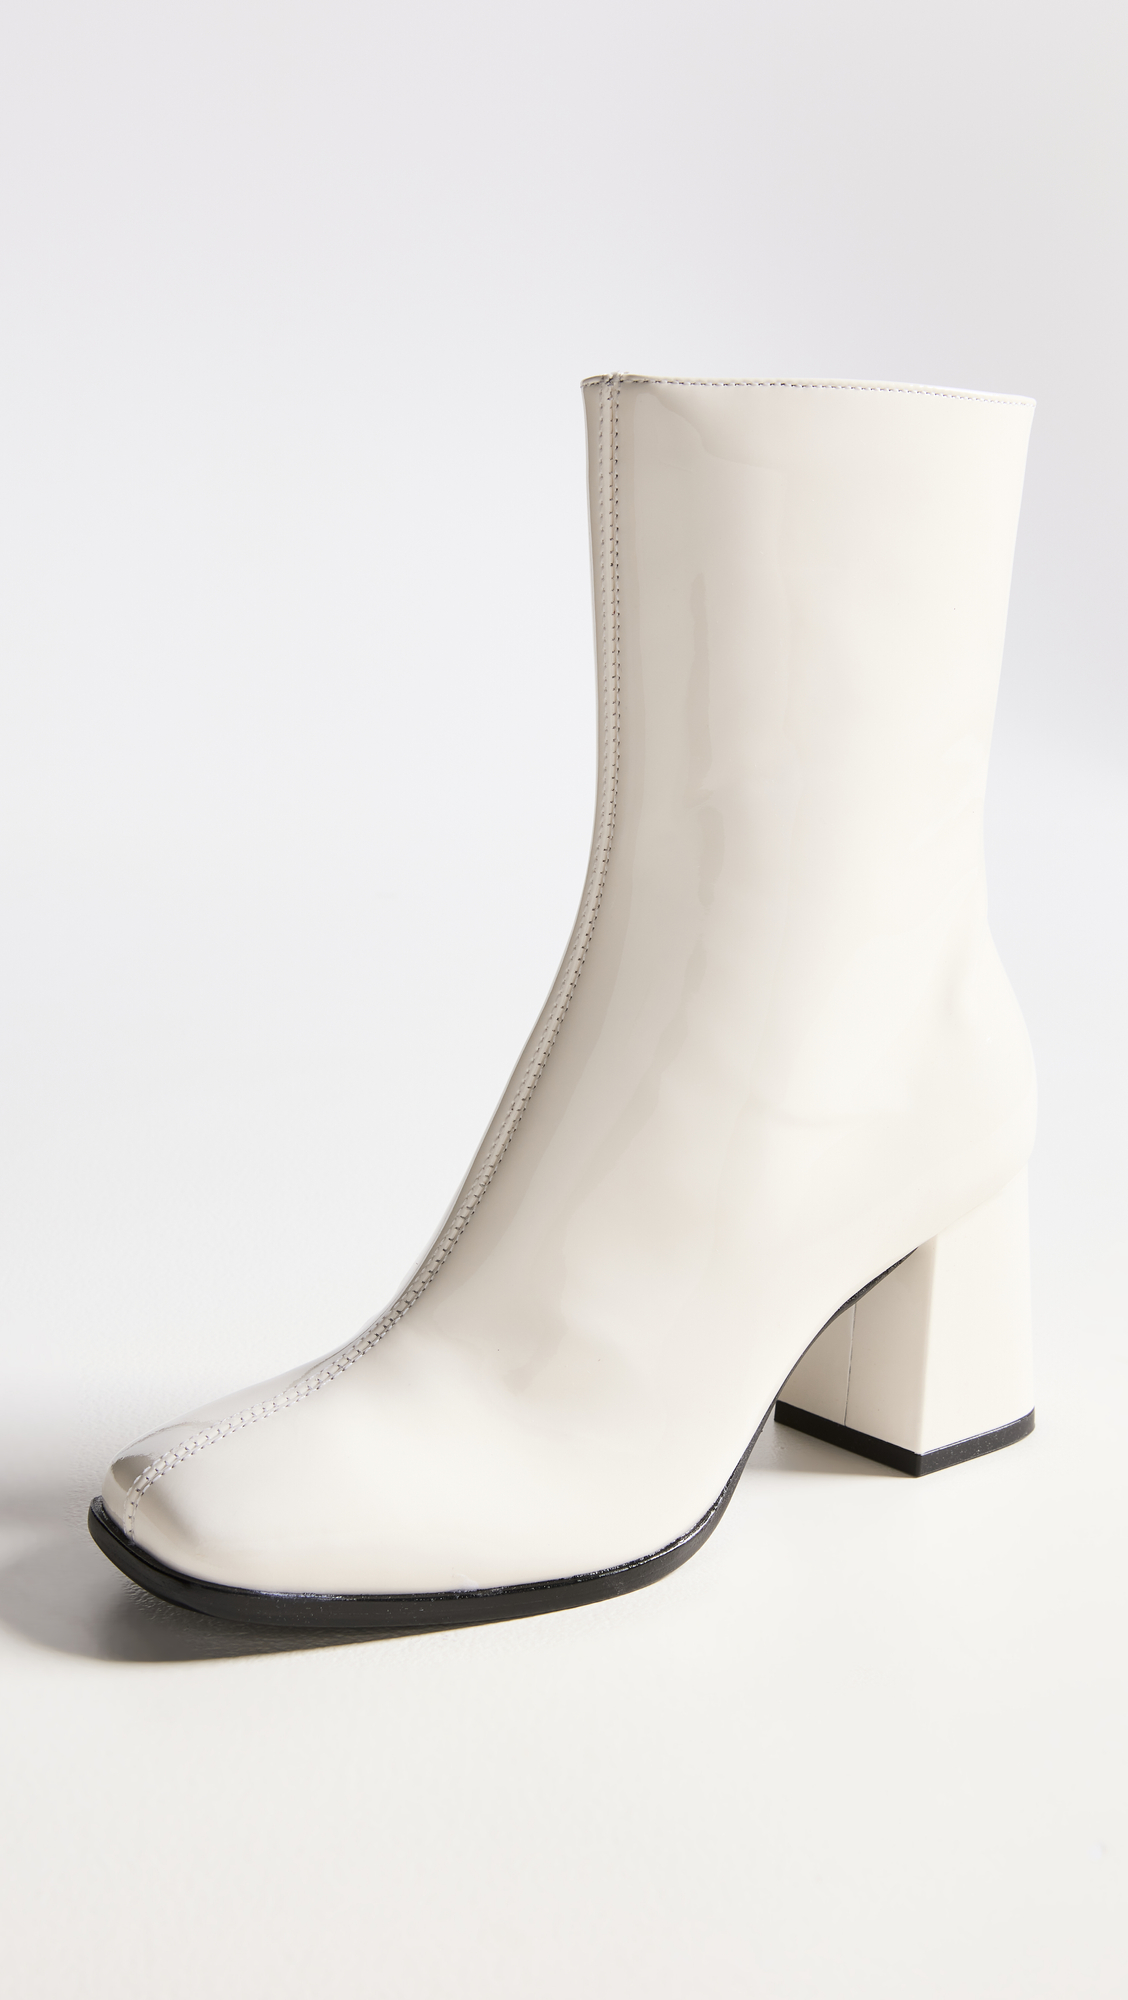 Reformation Nari Ankle Boots